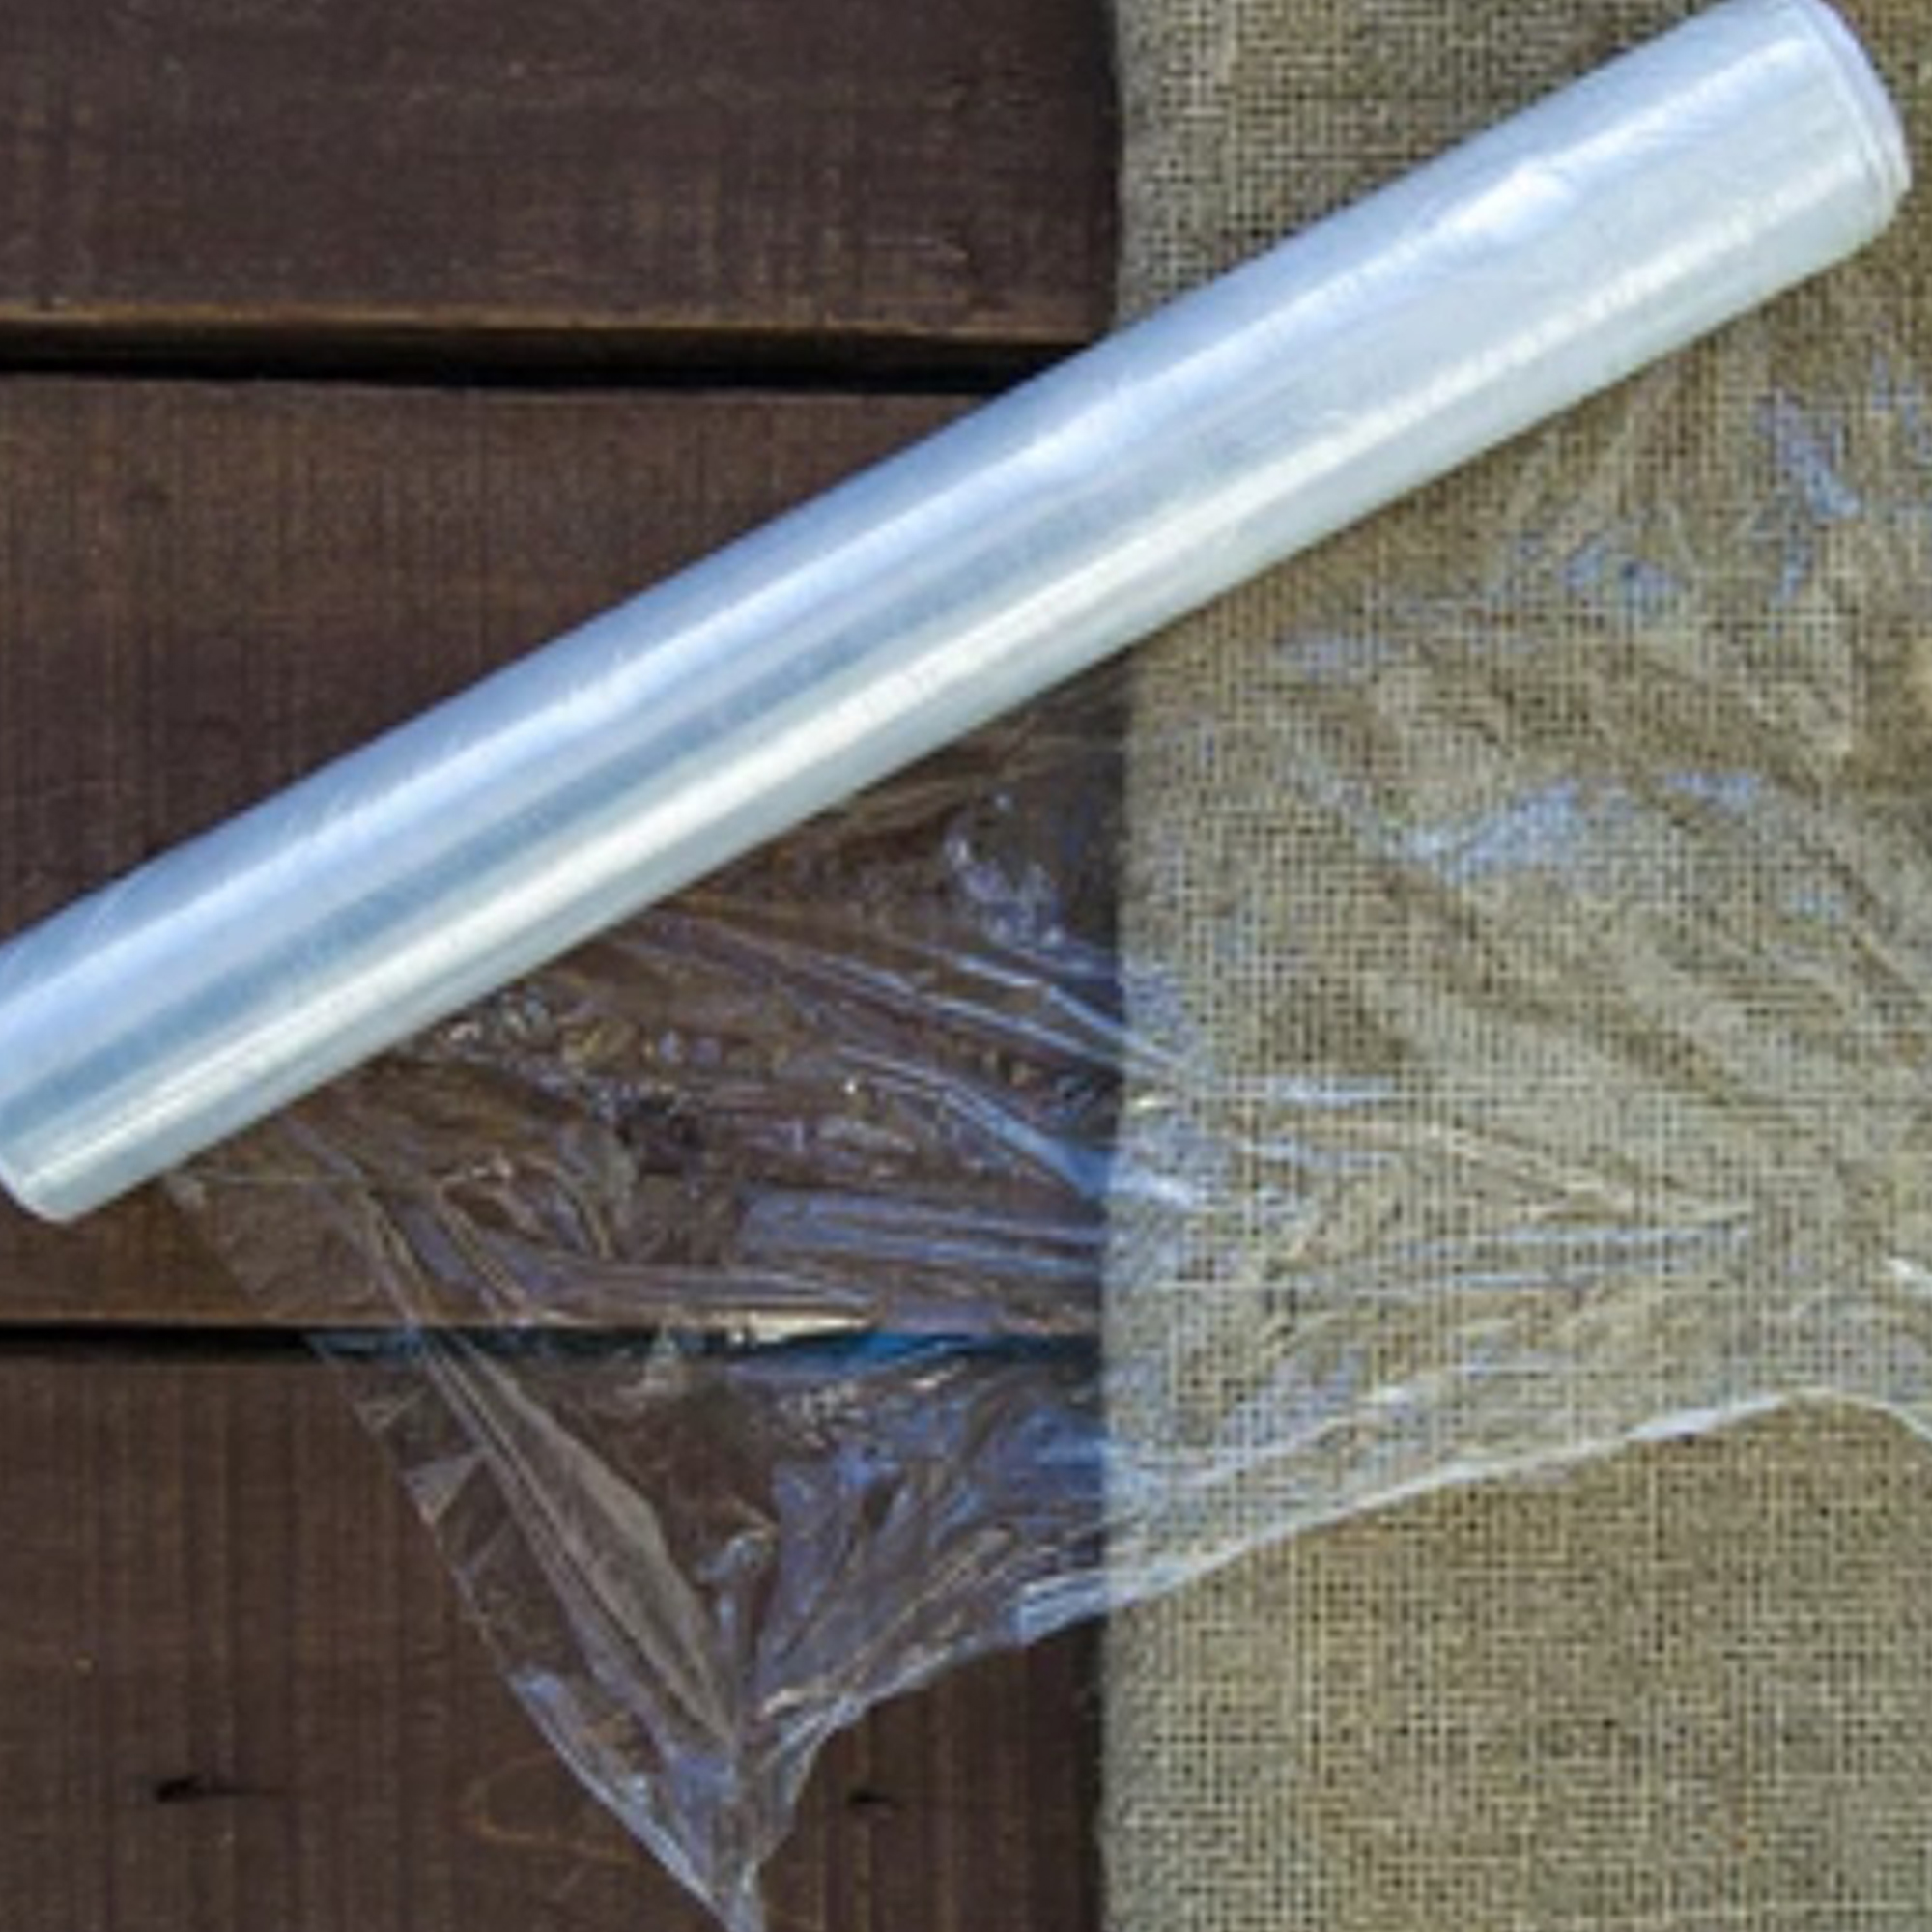 Cleaning and Housekeeping/CLING FILMS AND FOOD BAGS/Cling Film